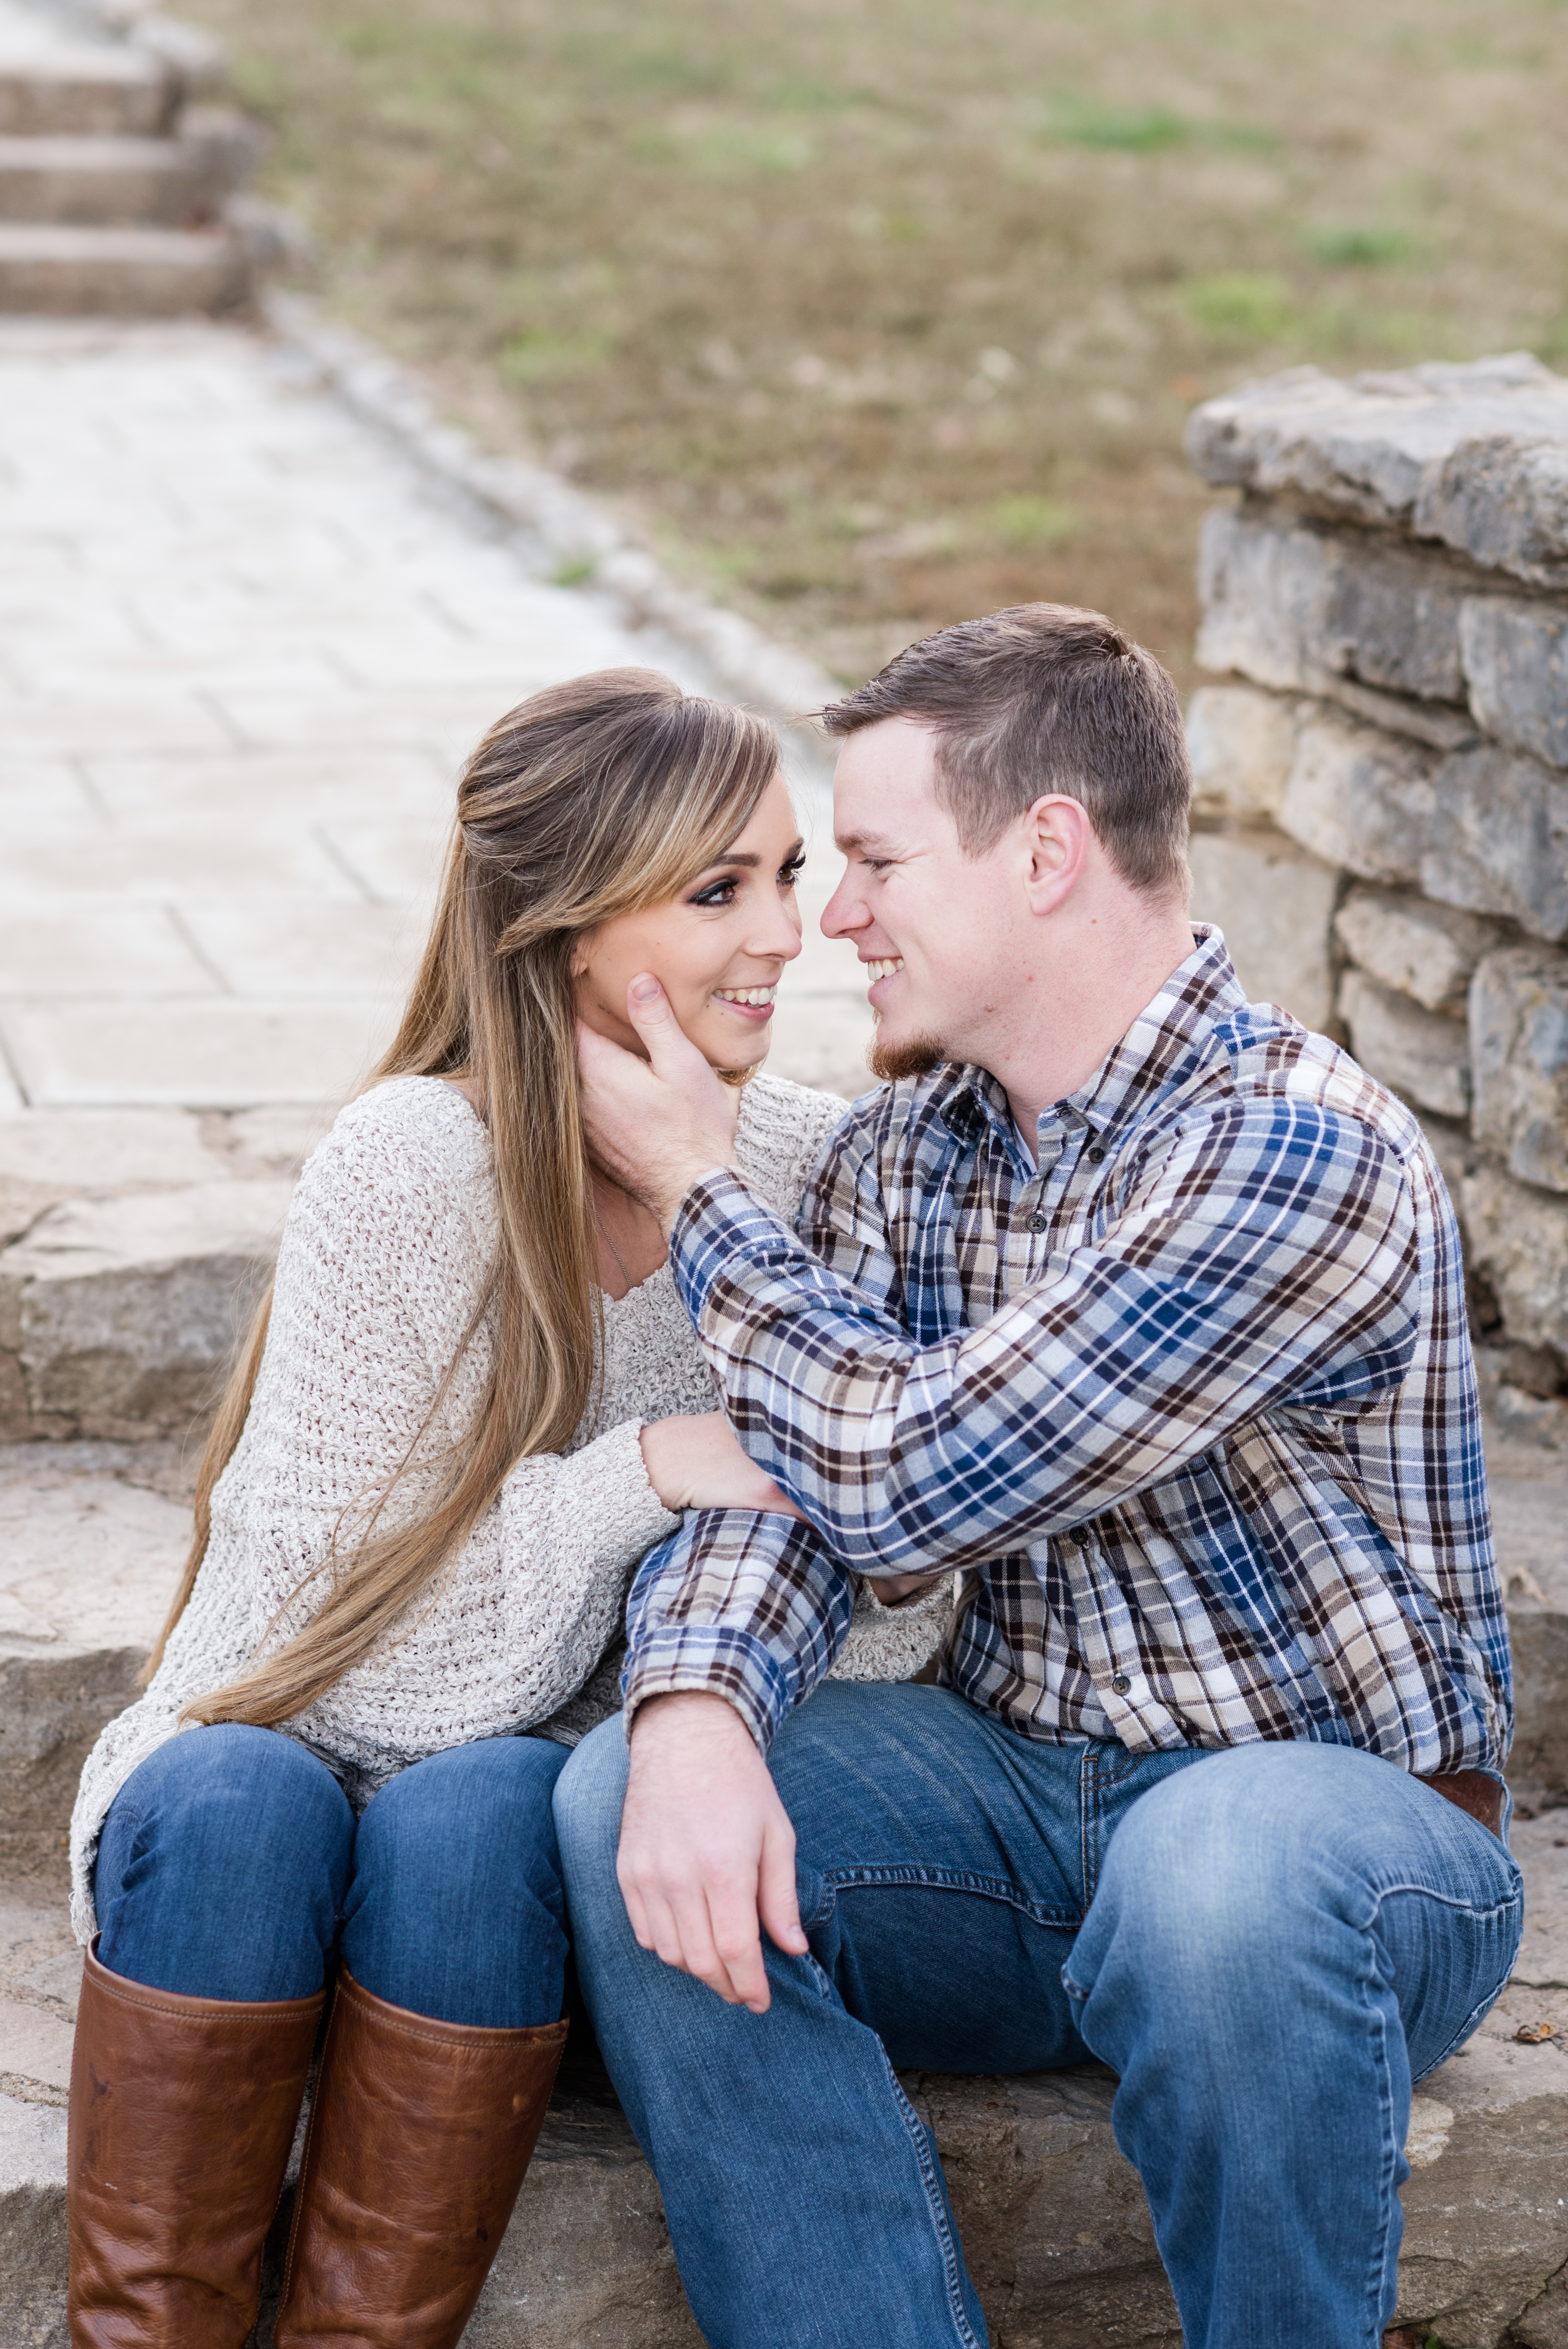 Fall Engagement at Percy Warner Park in Nashville, Tennessee